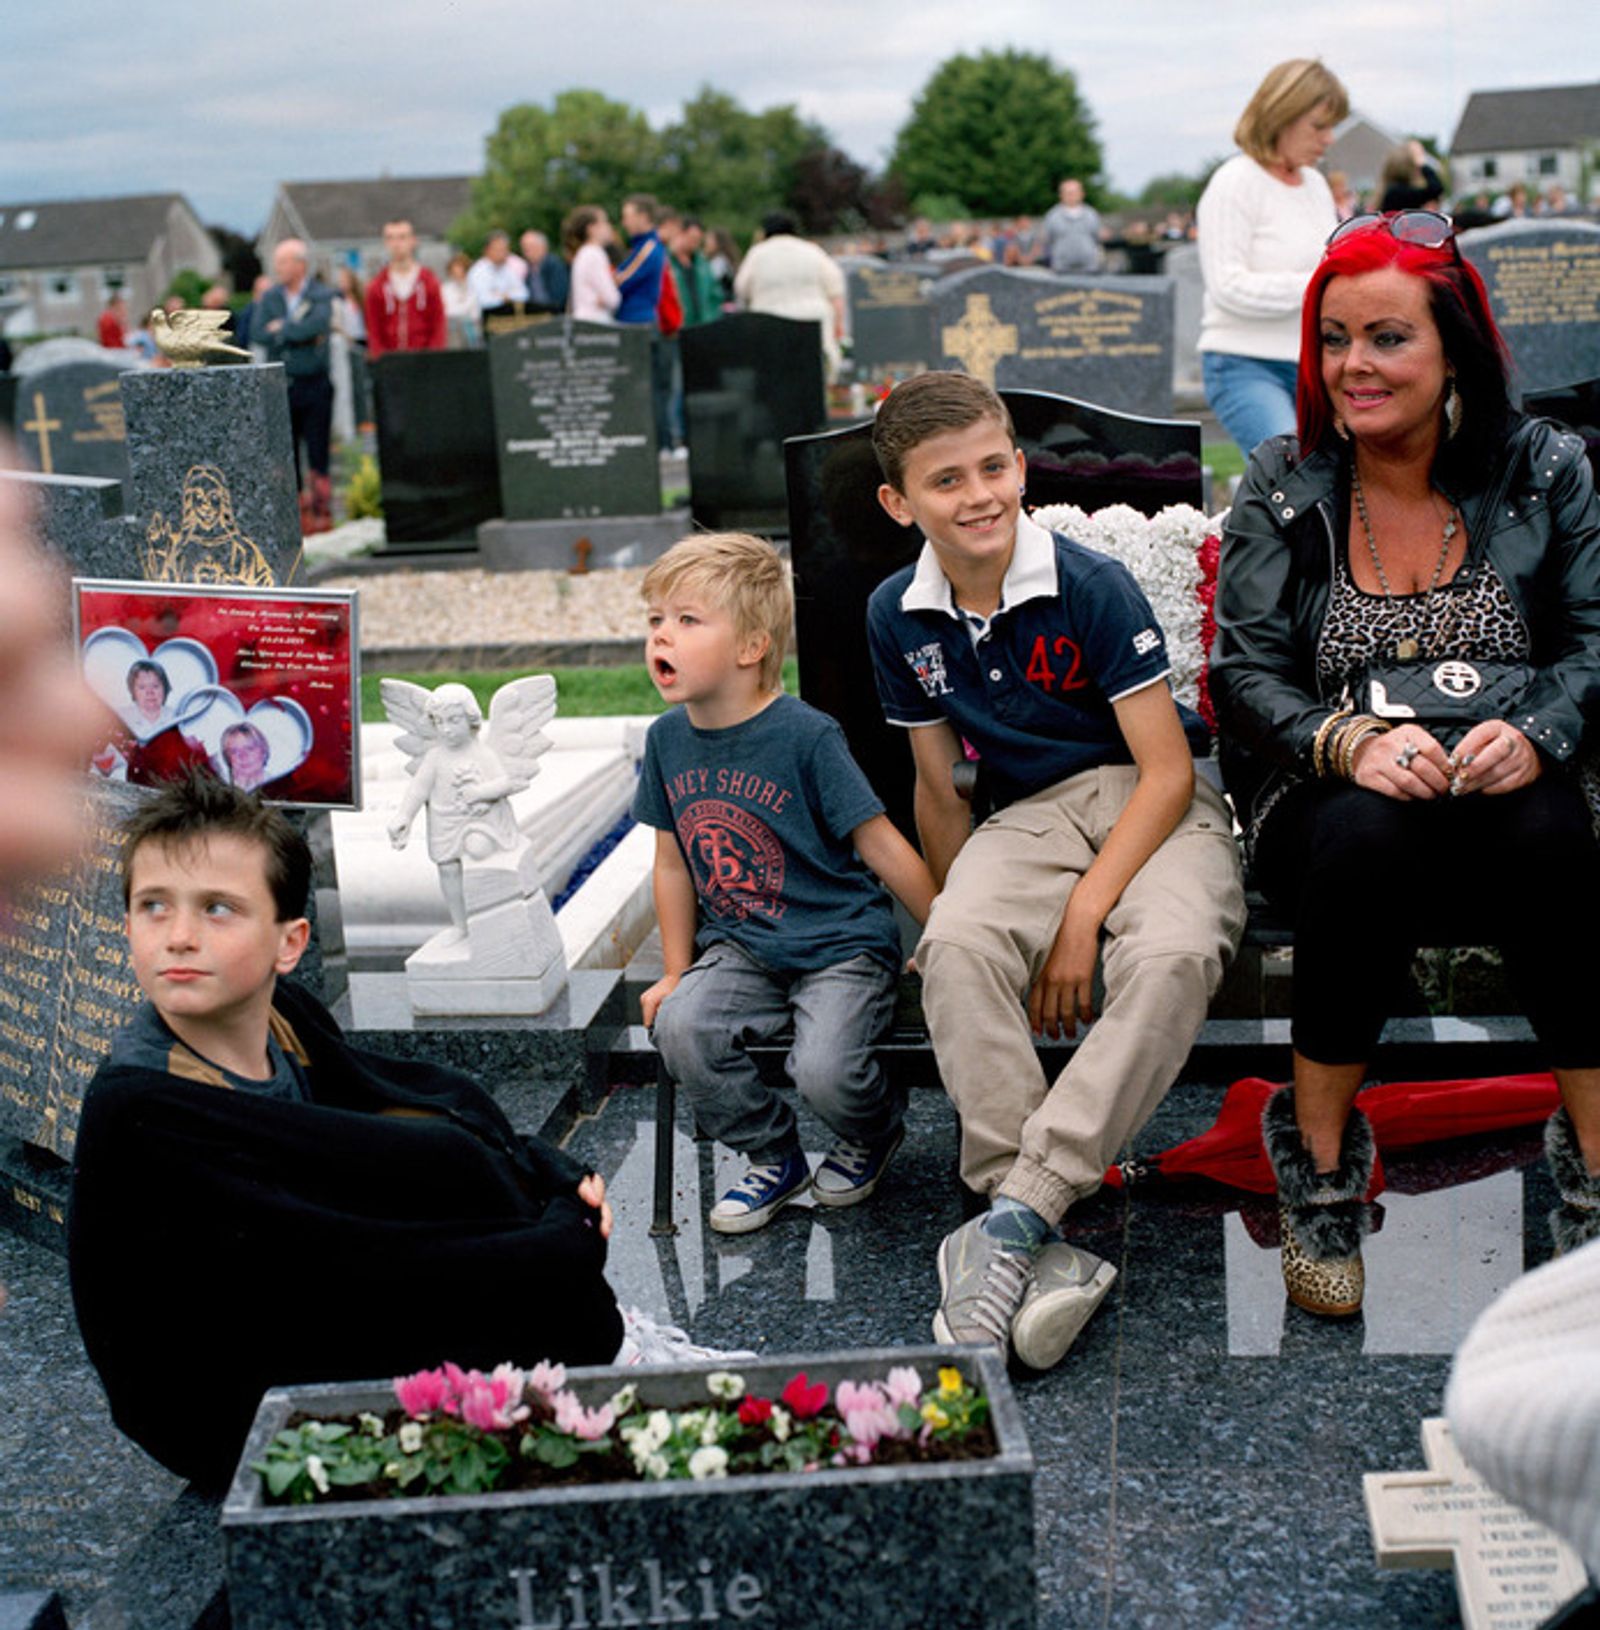 © Ciara Crocker - Image from the "And that's the truth." A Portrait of Irish Travellers photography project